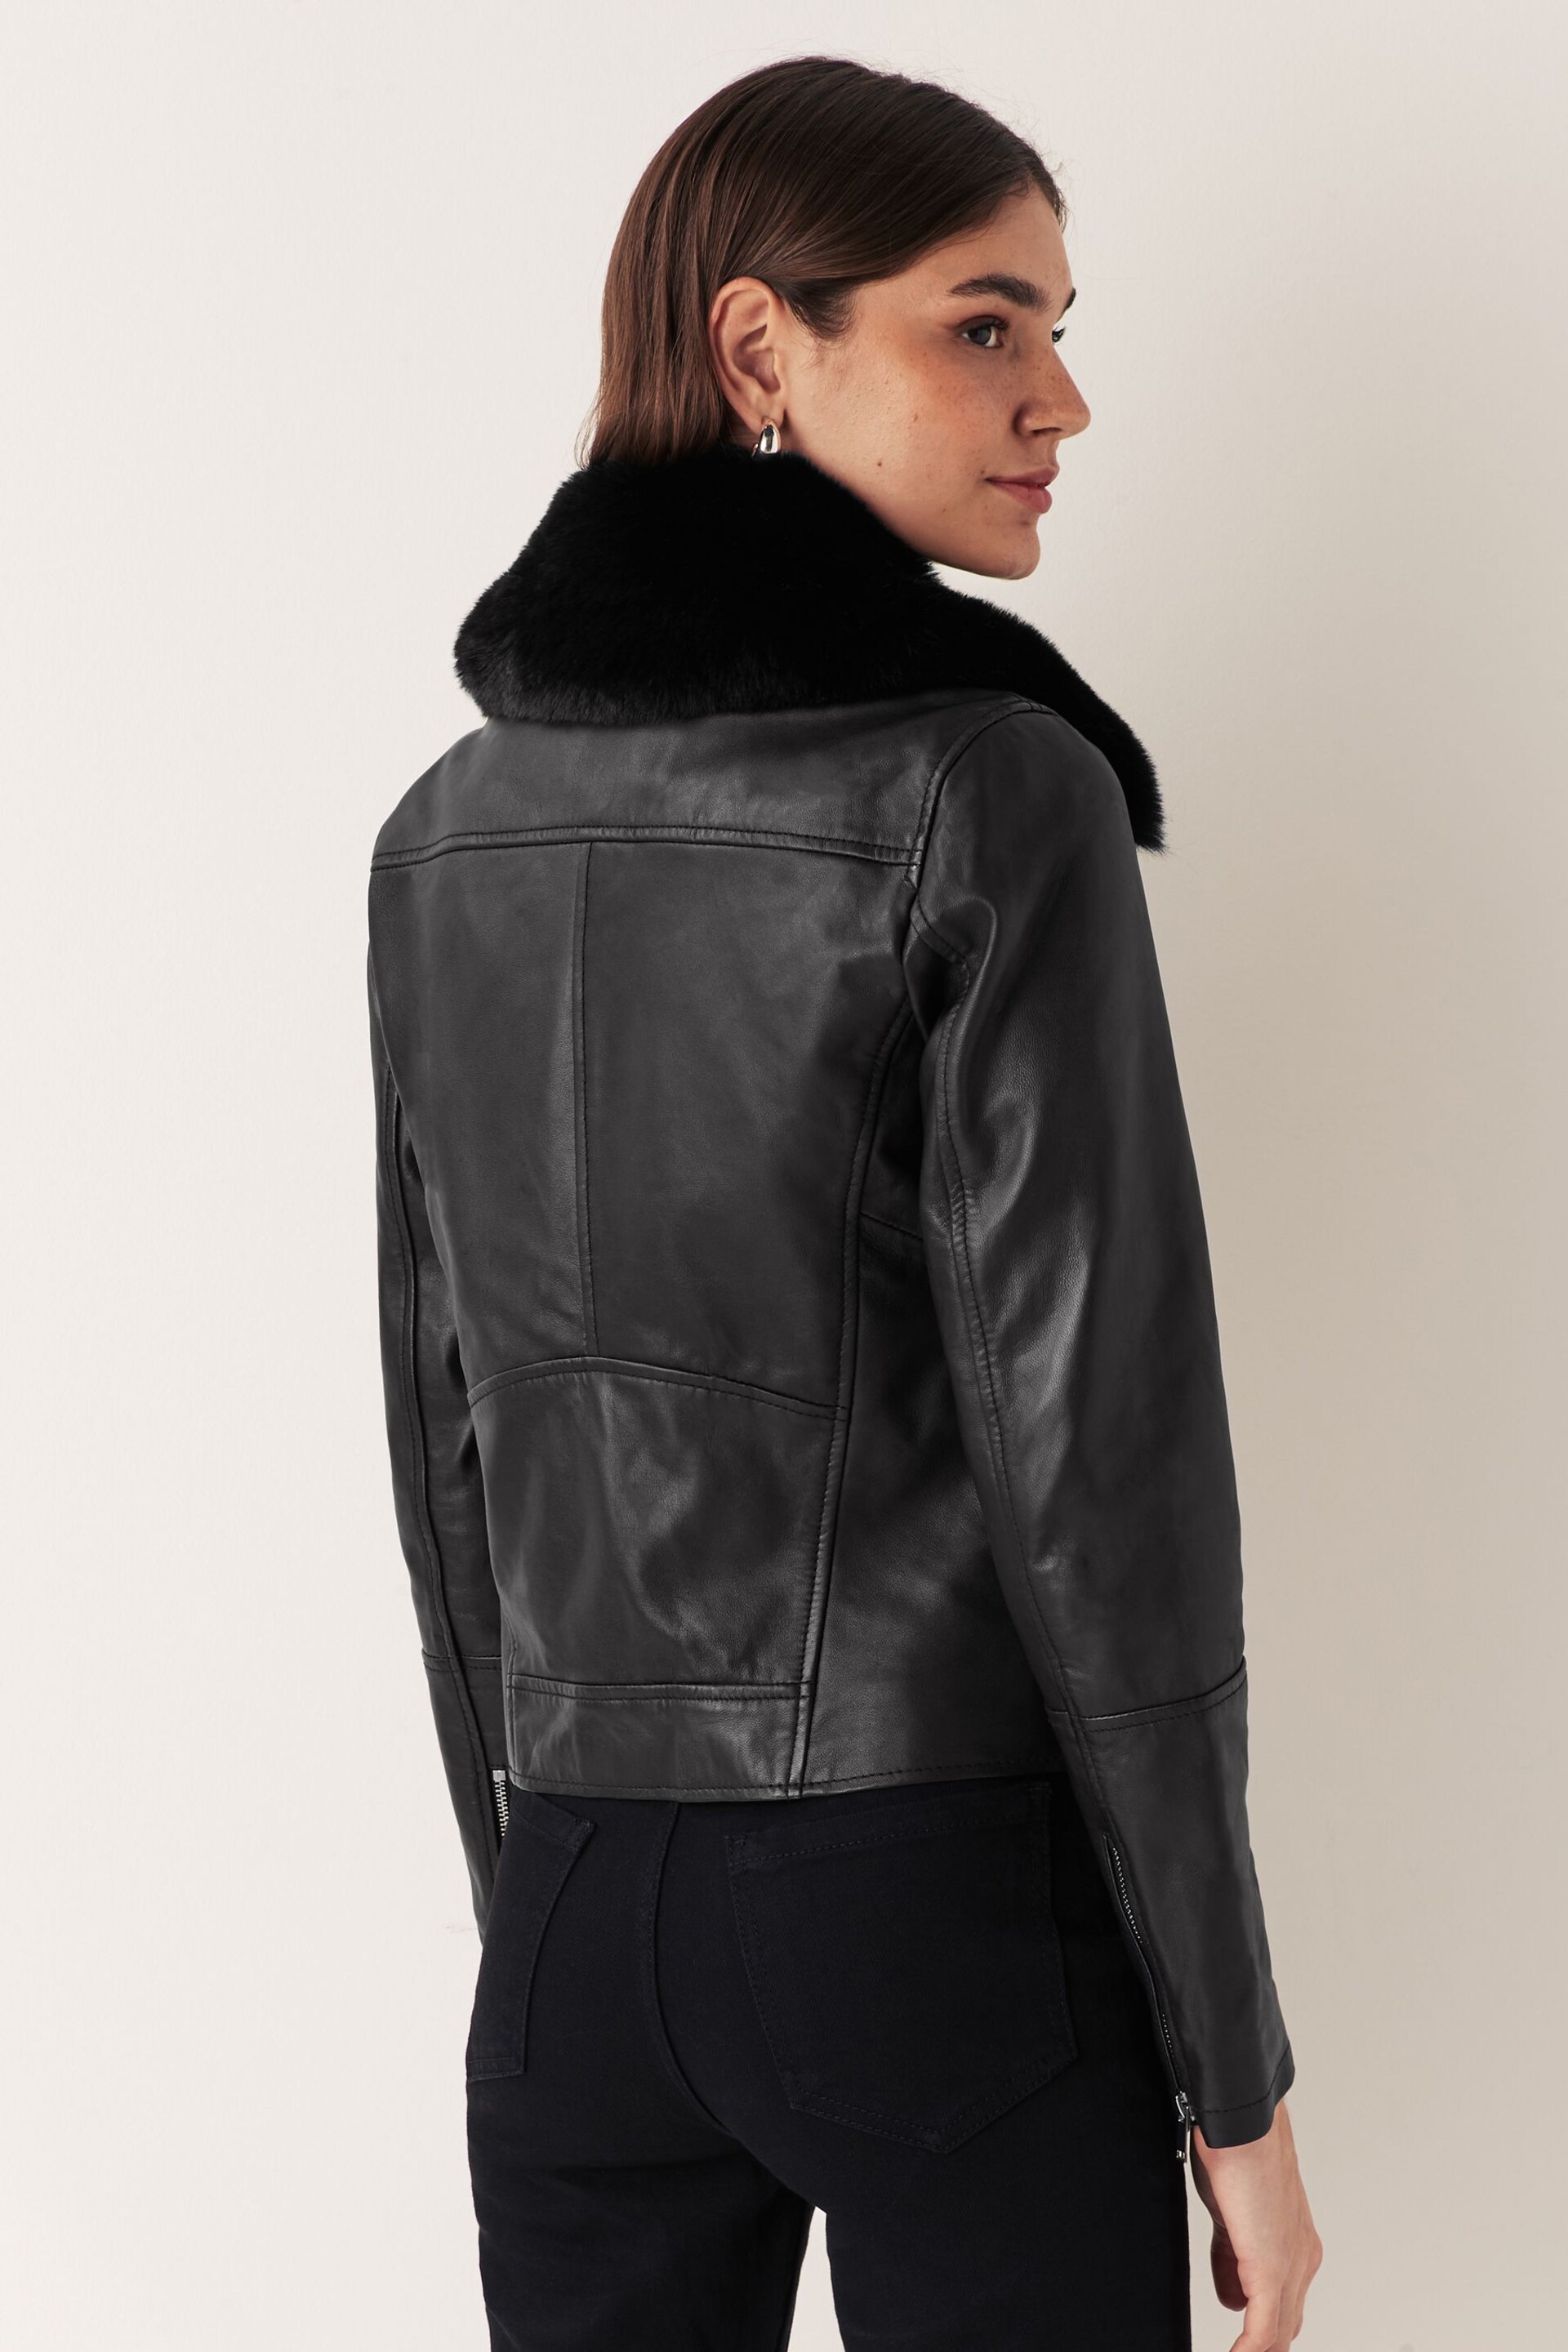 Urban Code Black Leather Biker With Removable Faux Fur Collar Jacket - Image 3 of 8